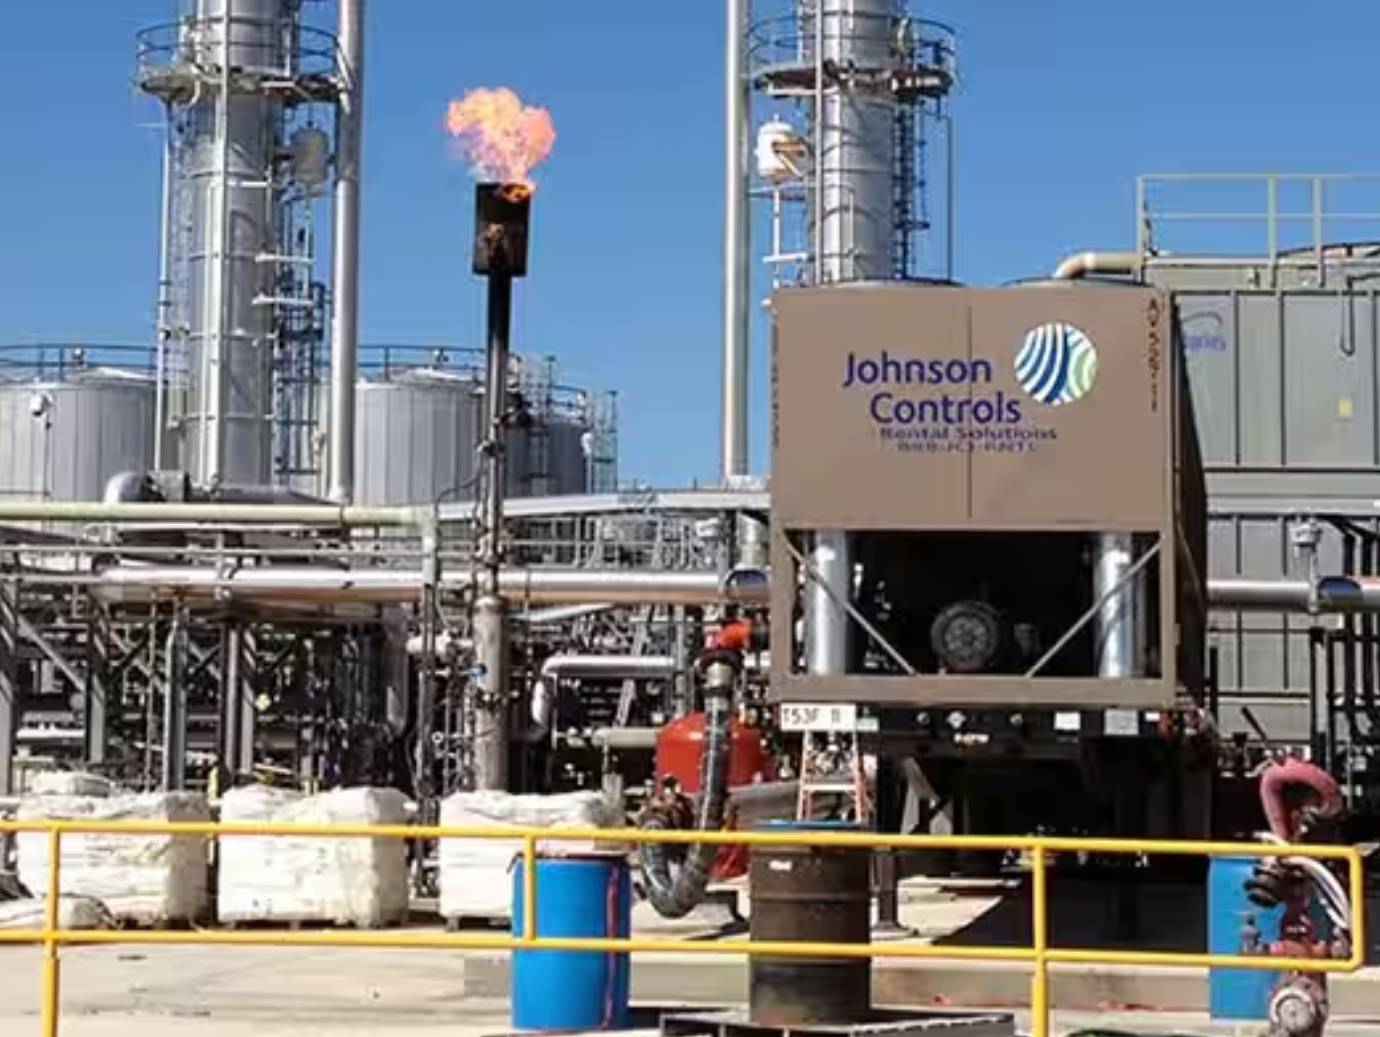 A yard in an industrial facility, with a carton bearing the Johnson Controls logo